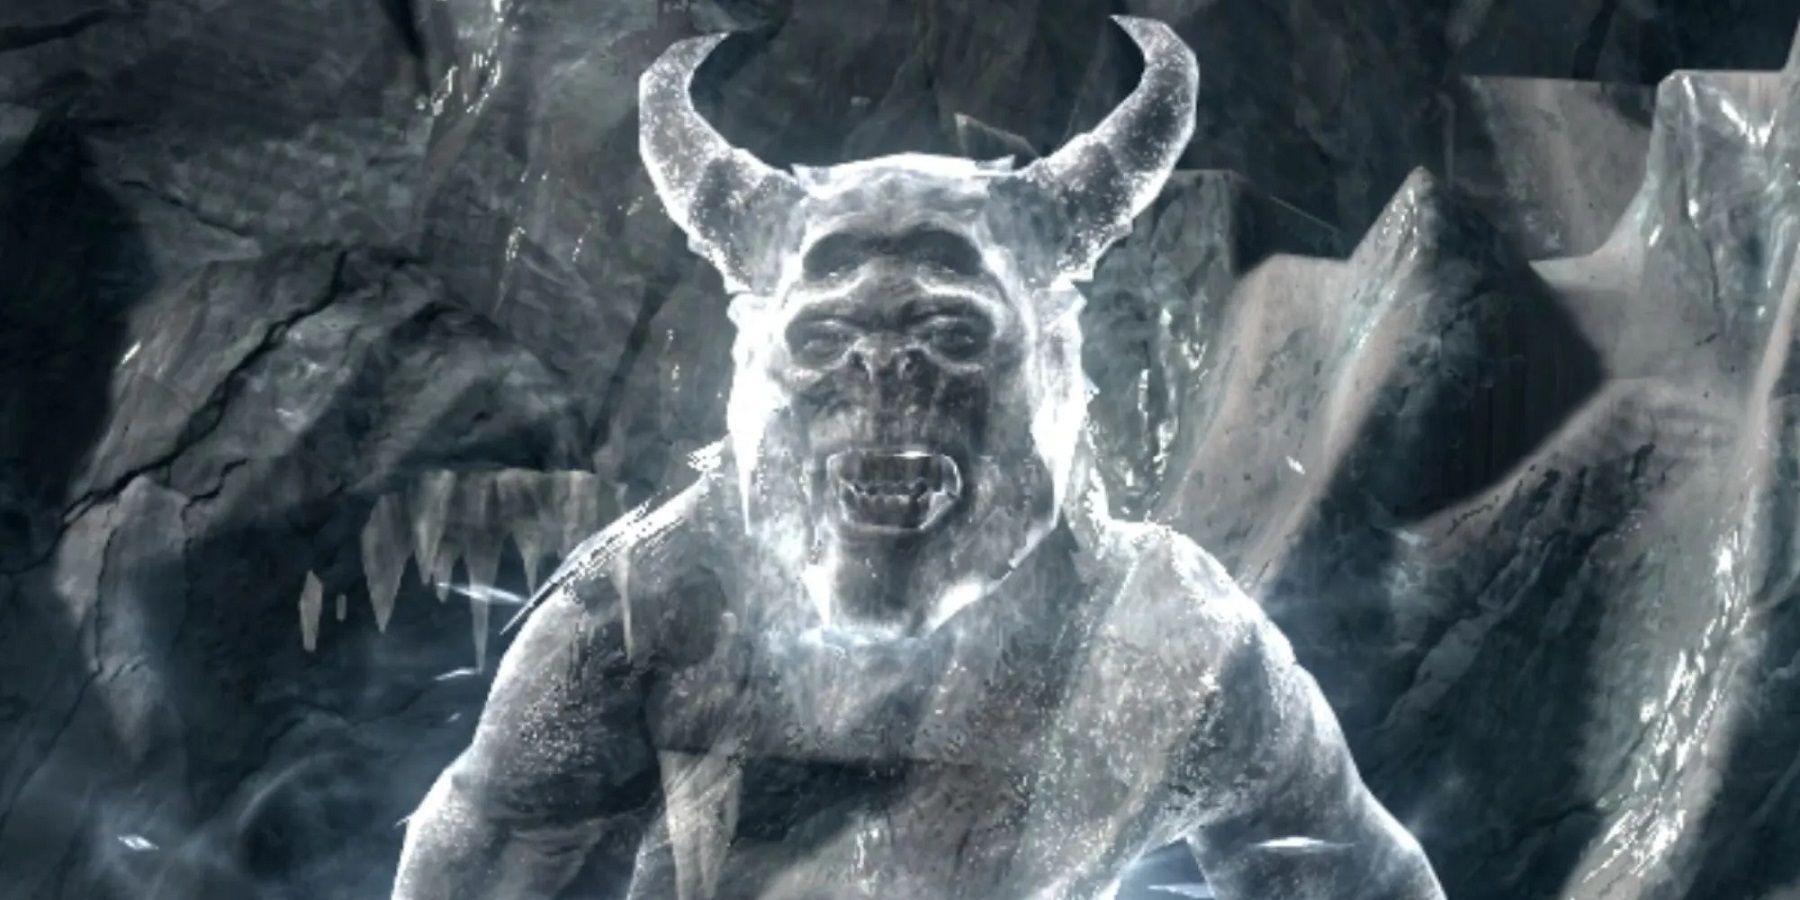 Image from The Elder Scrolls 5: Skyrim showing the frost giant Karstaag.